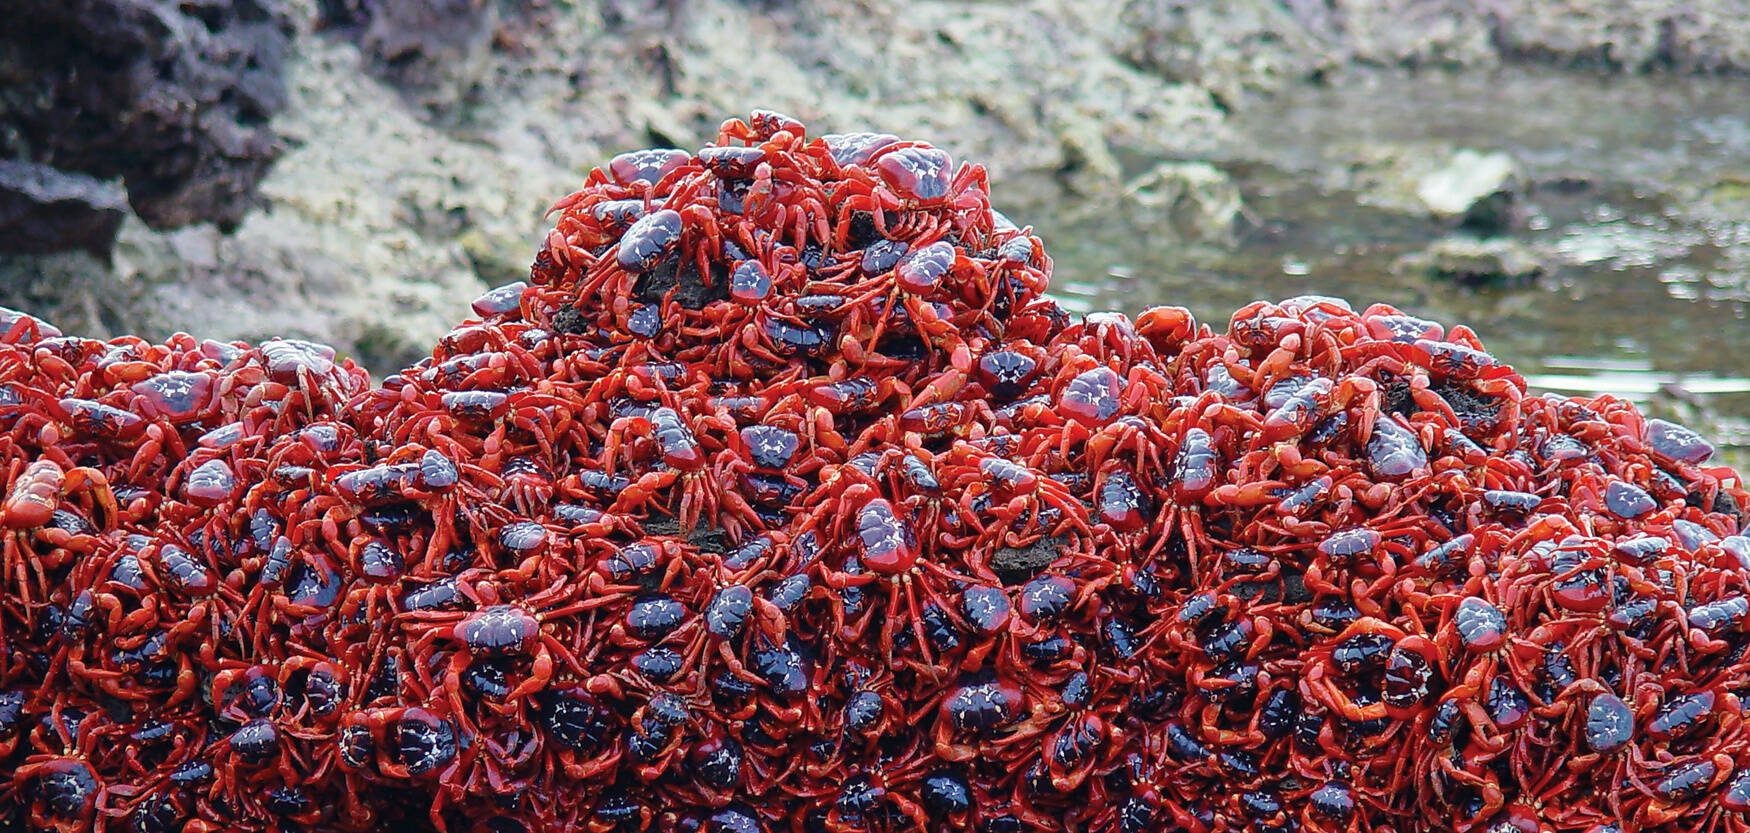 Tens of millions of crabs live on the Australian territory of Christmas Island. They migrate from the forest to the ocean for breeding season, forming an incredible sight.